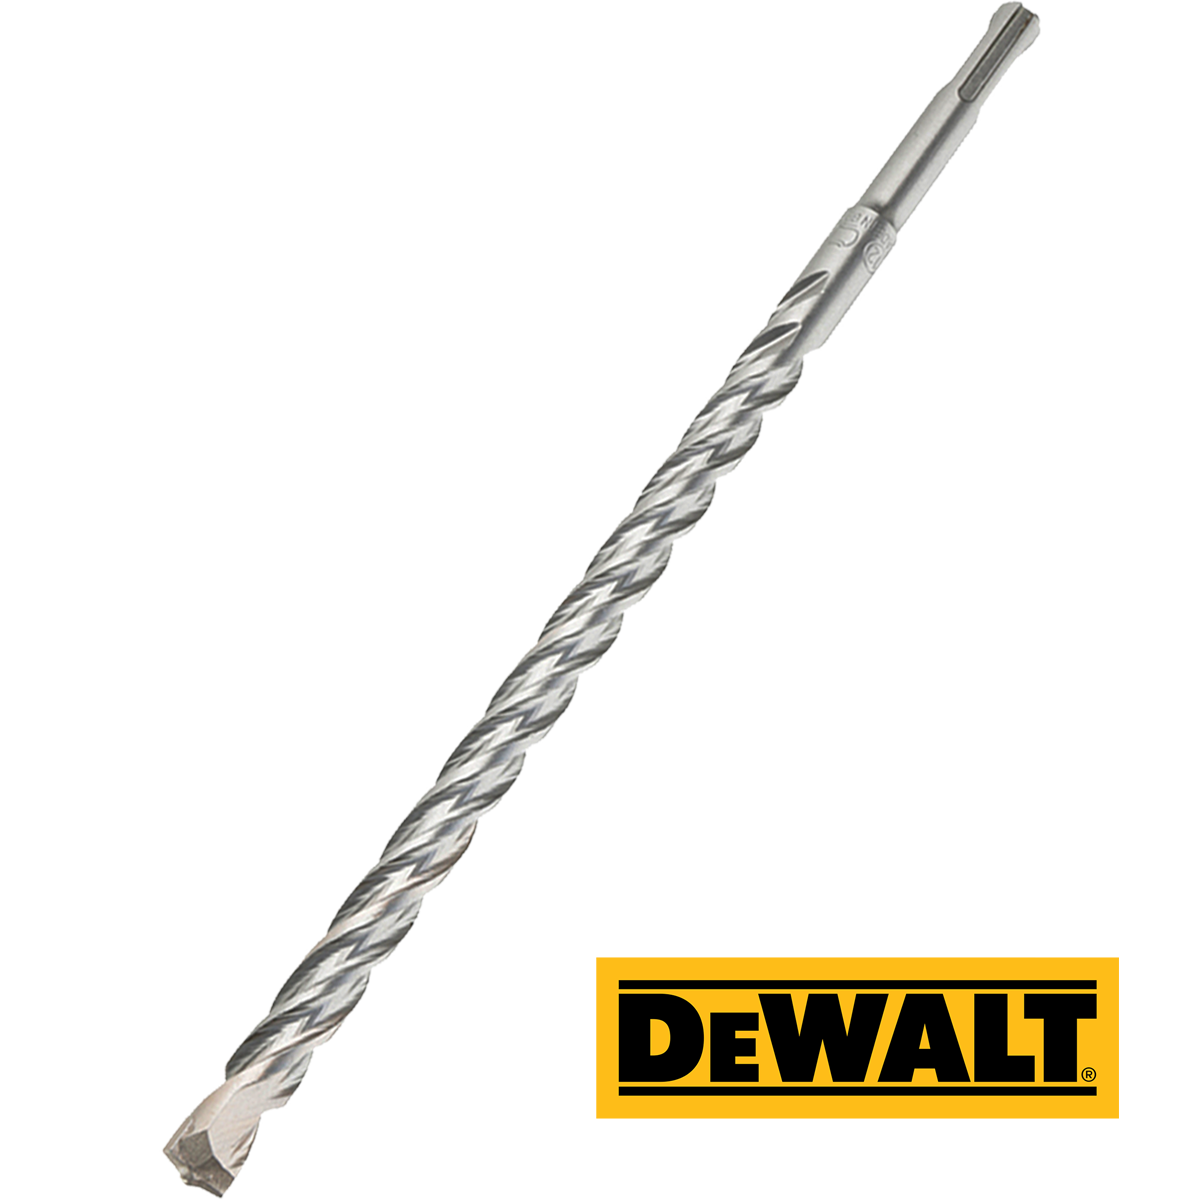 A range of DeWalt extreme SDS drill bits for use on harder materials like concrete, stone, and brick etc